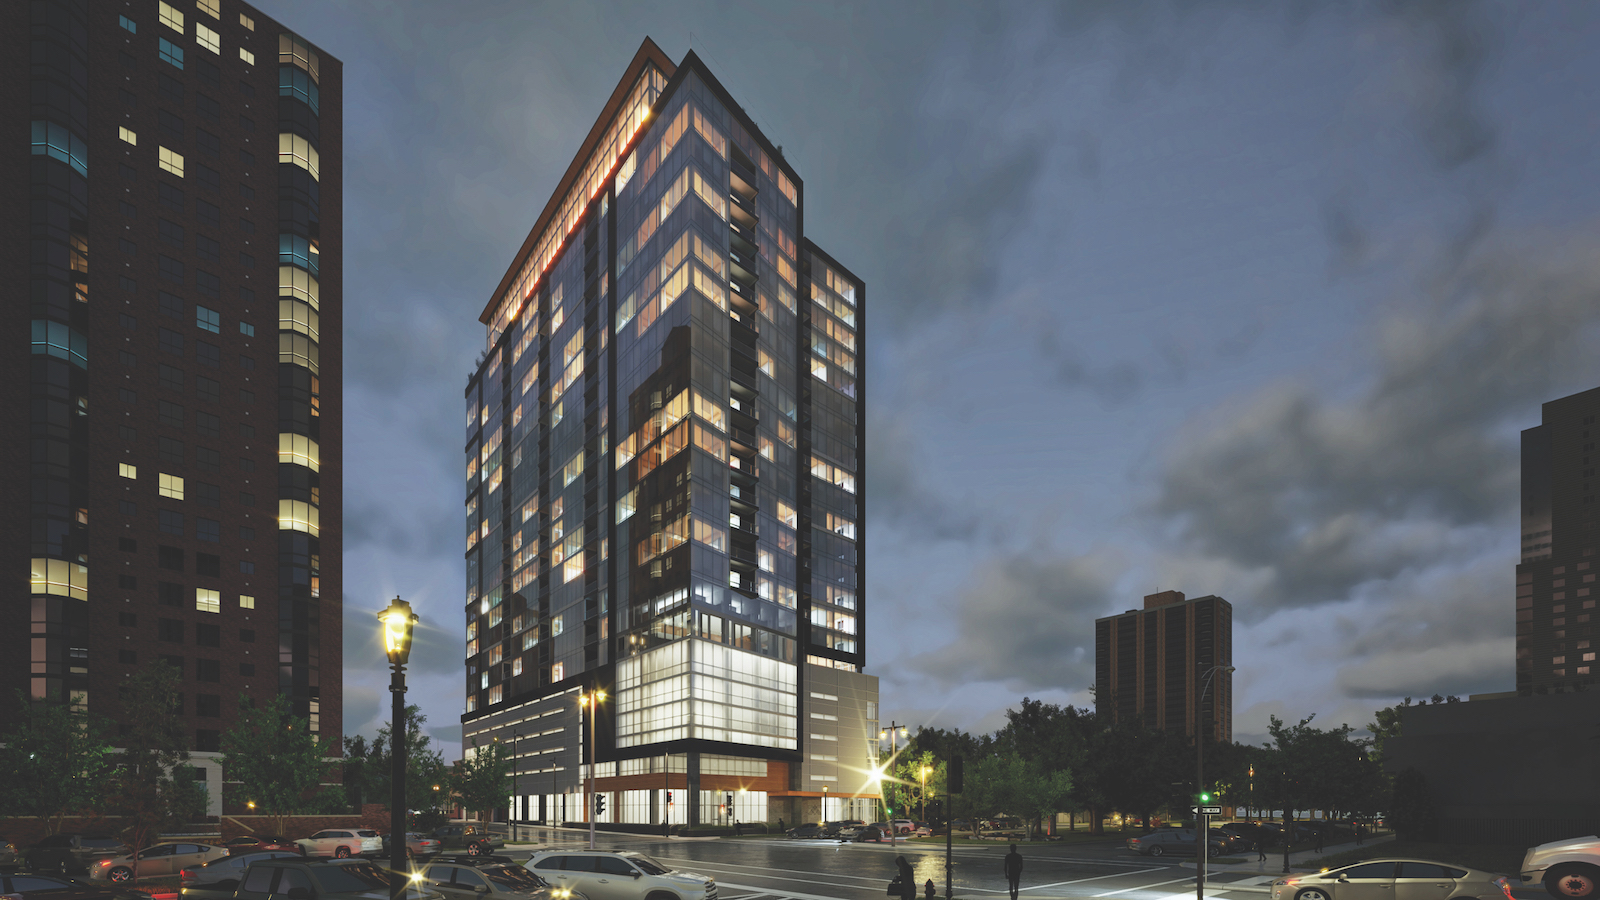 Currently under construction, the Ascent tower in Milwaukee, USA, will soon be the tallest timber structure on earth. Image: Korb & Associates Architects